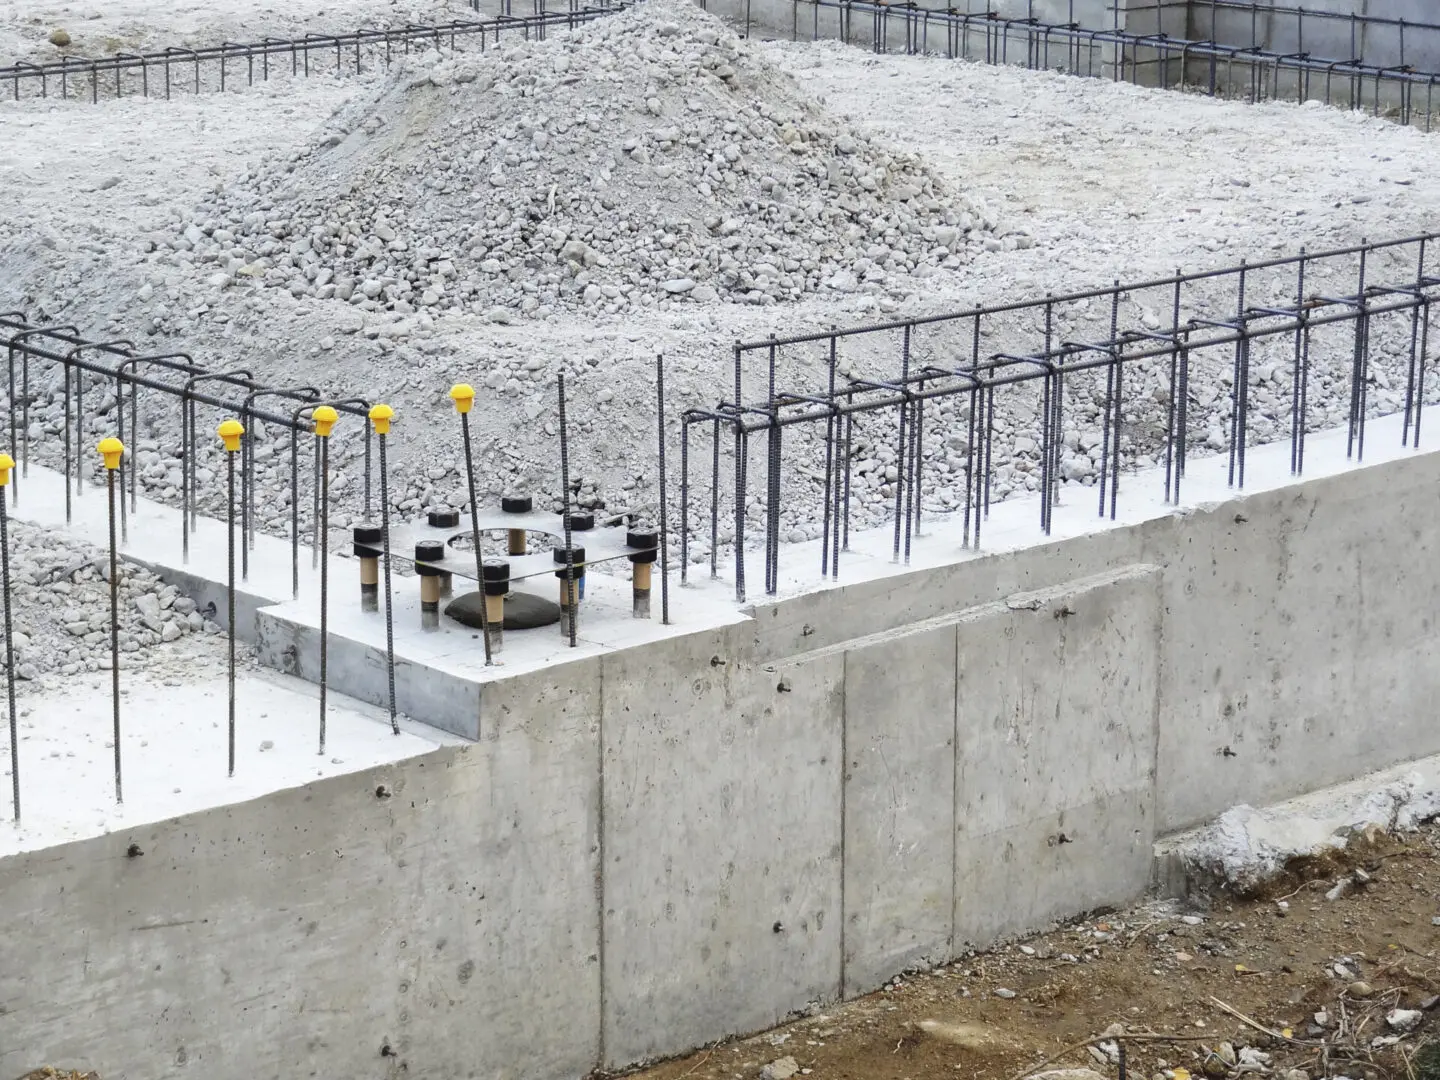 A concrete wall with metal bars and yellow posts.